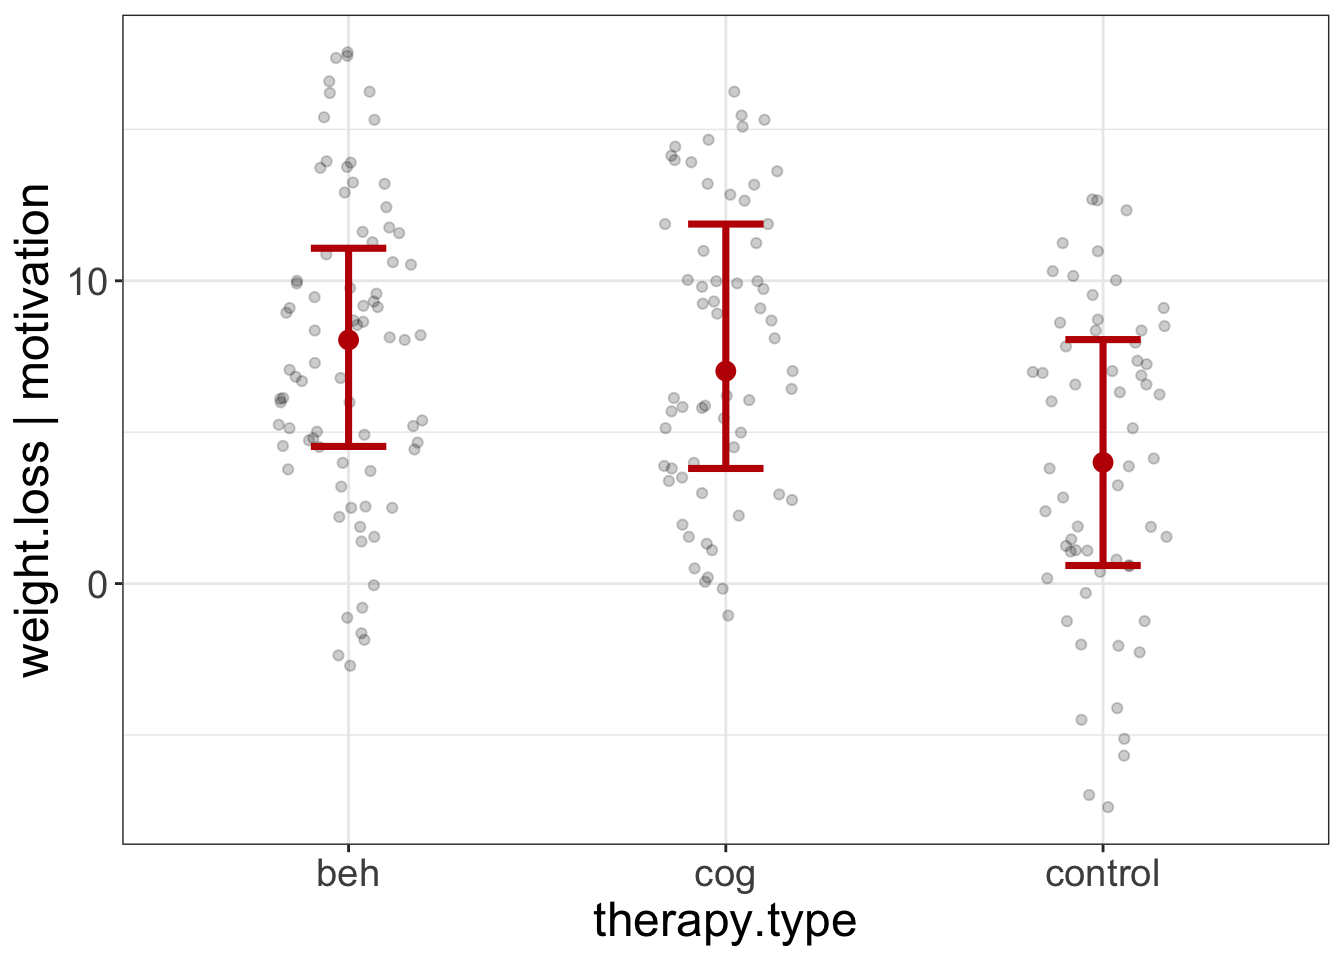 Added Variable Plot of the therapy.type scores on weight loss, after controlling for motivation.